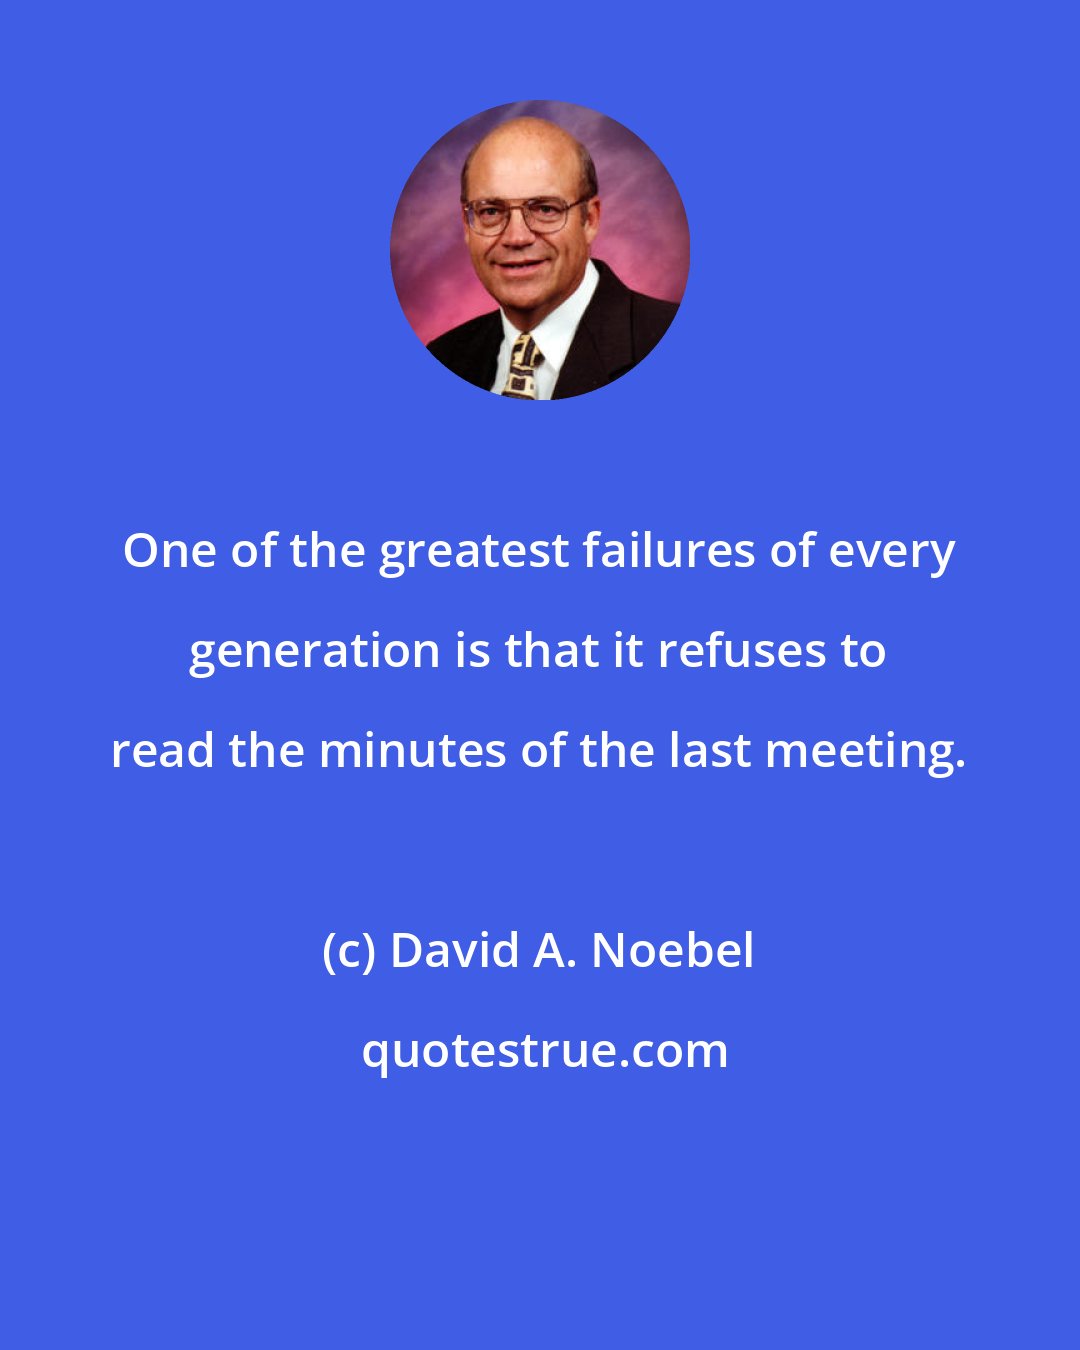 David A. Noebel: One of the greatest failures of every generation is that it refuses to read the minutes of the last meeting.